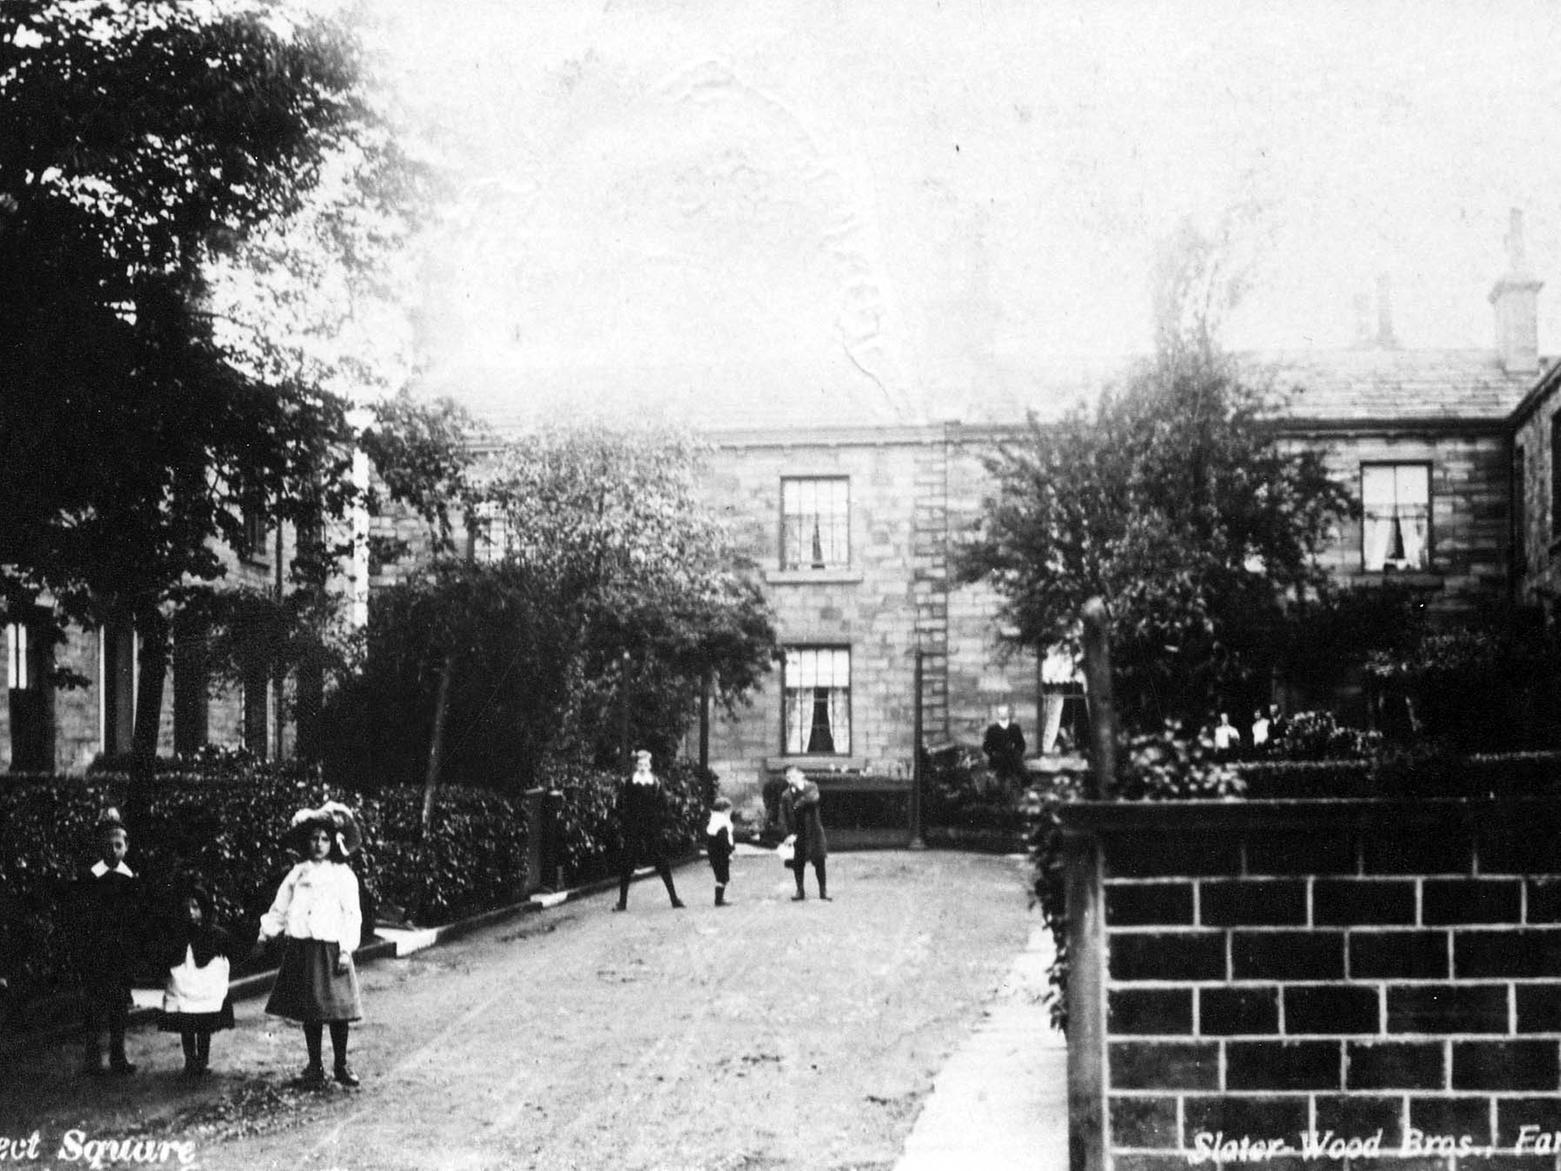 Prospect Square off New Street, taken around the late 19th or early 20th century. Children are playing in the street.